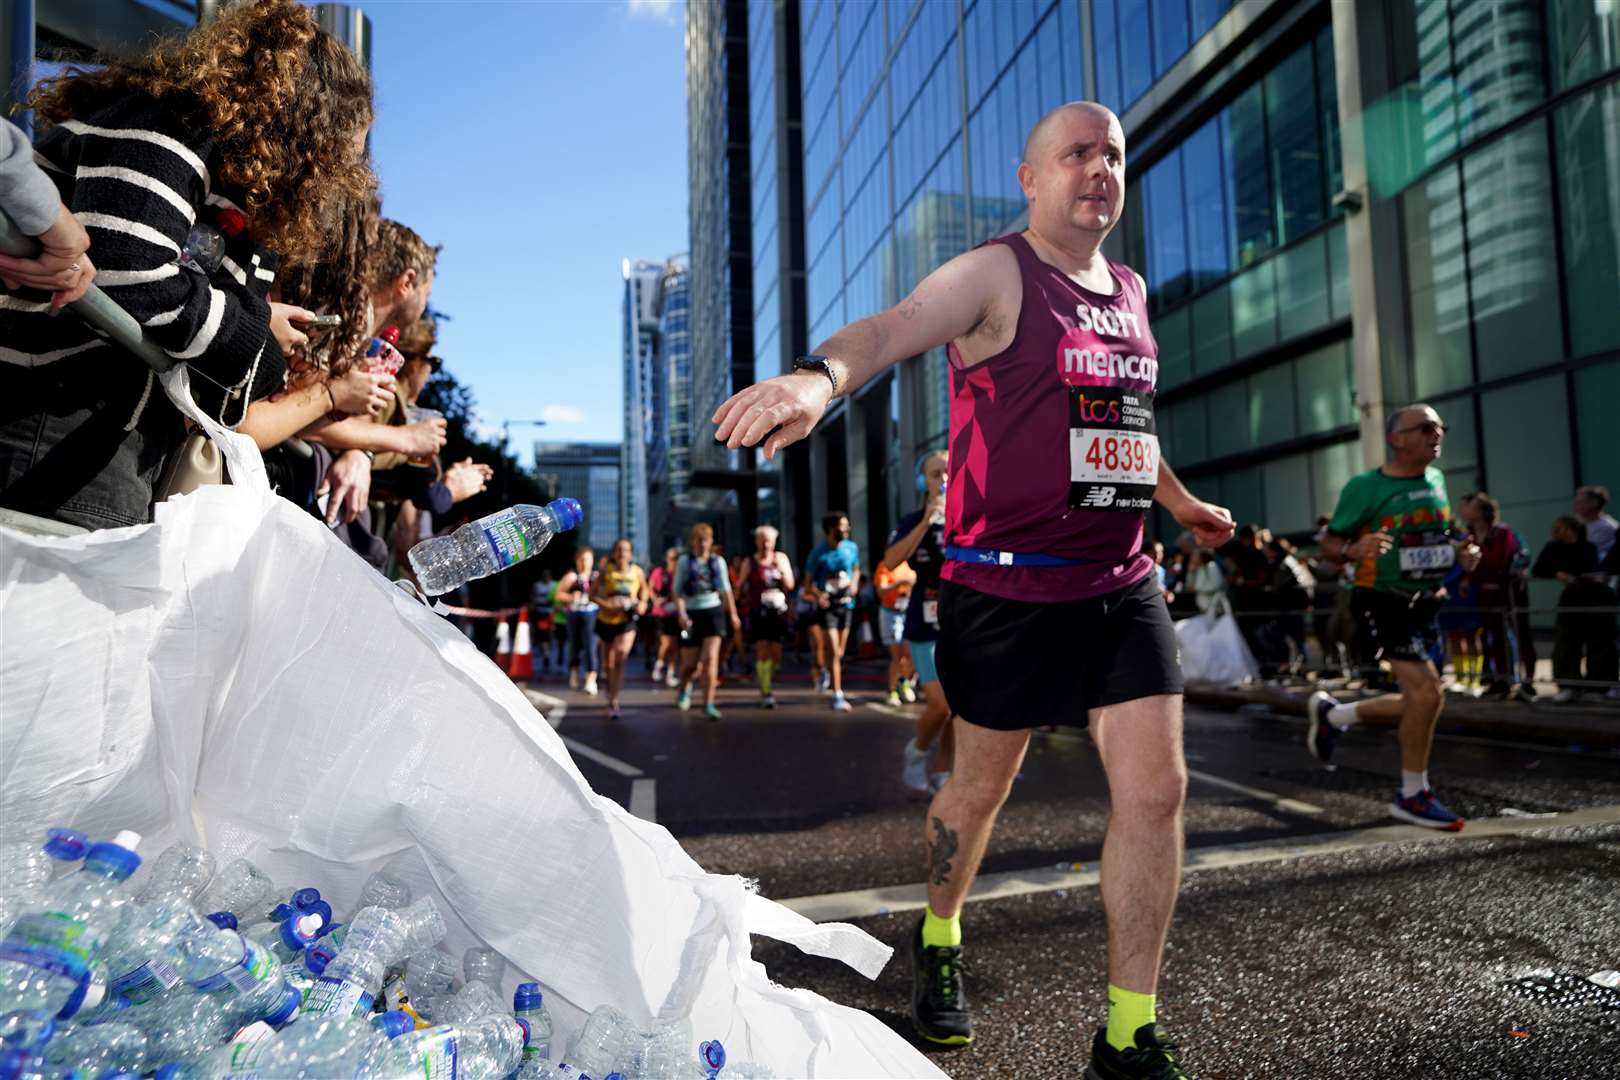 Runners who grab a bottle of water on the TCS London Marathon route are encouraged to ‘Drink, Drain, Drop’ so the empty bottle can be collected for recycling (James Manning/PA)